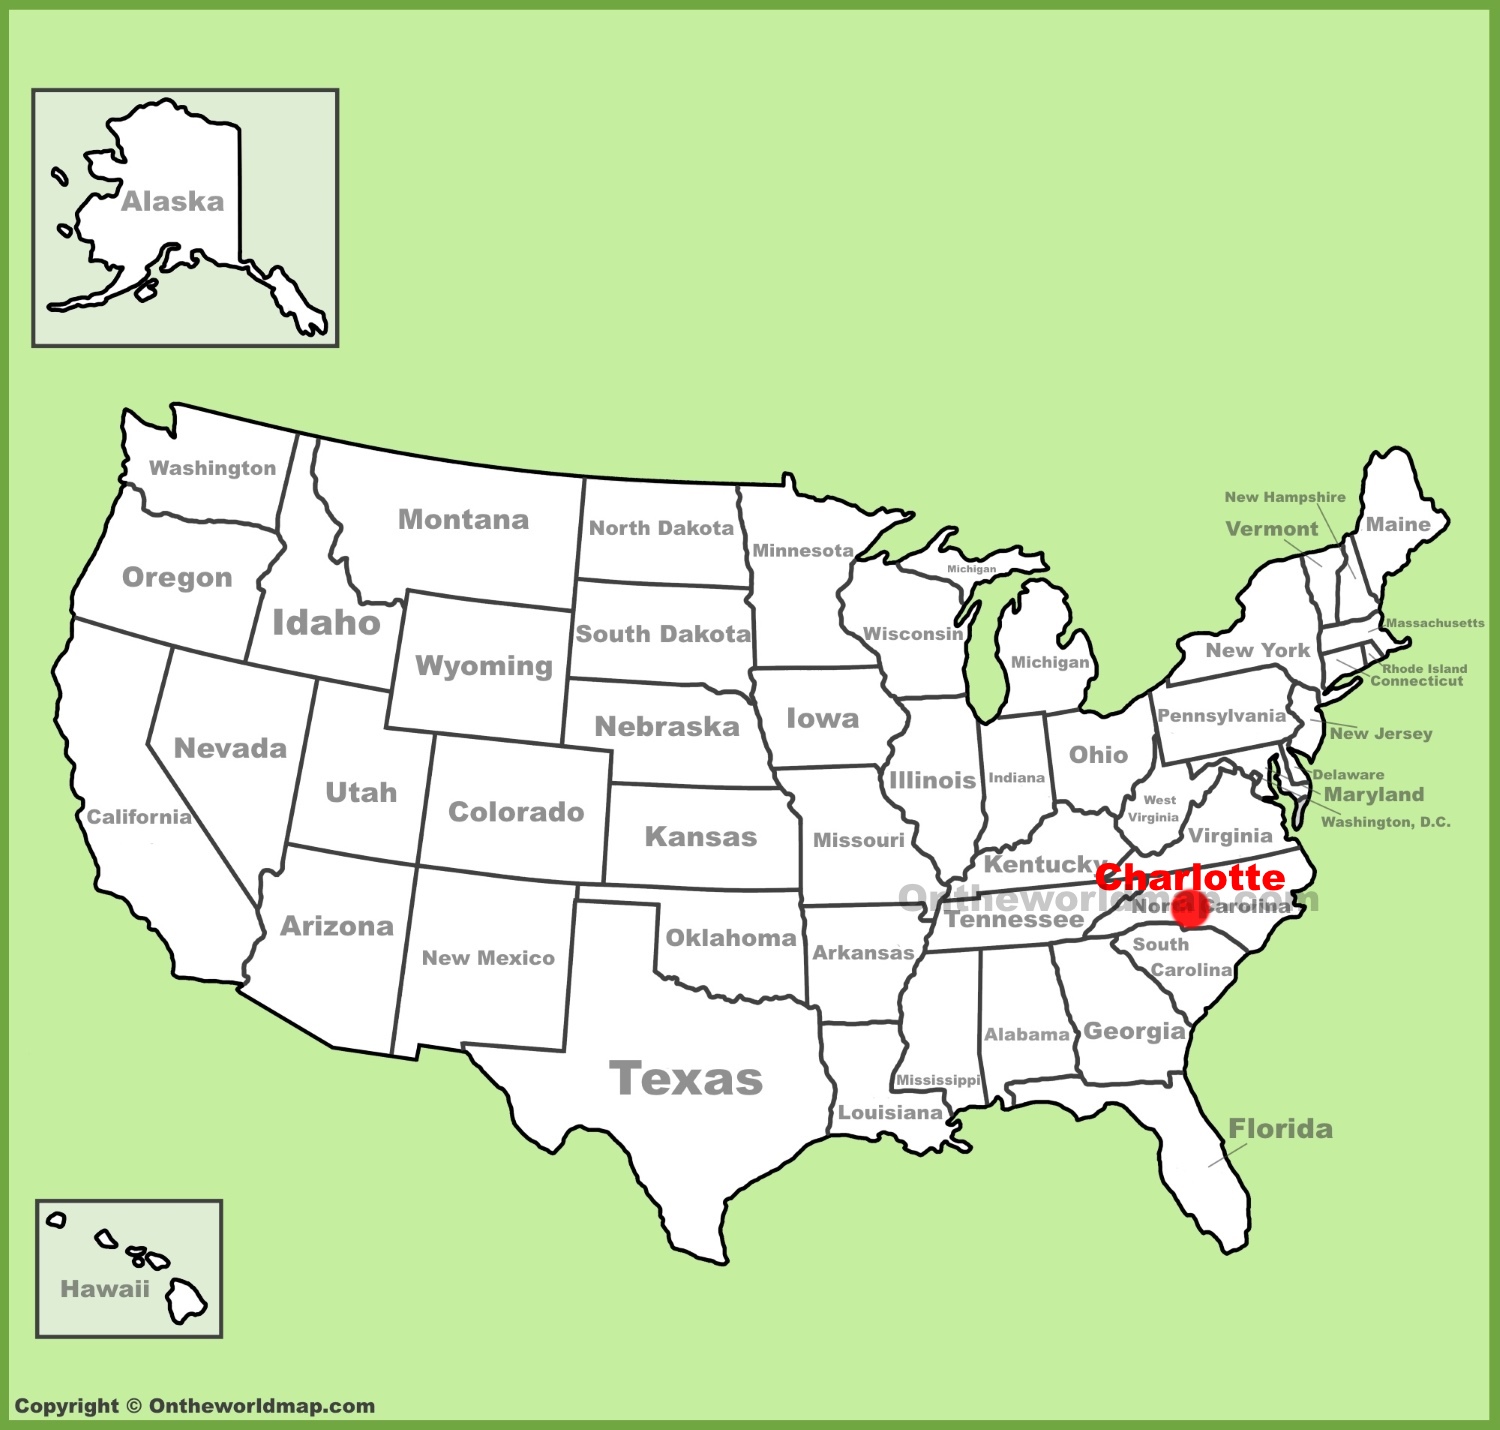 Charlotte Location On The U S Map